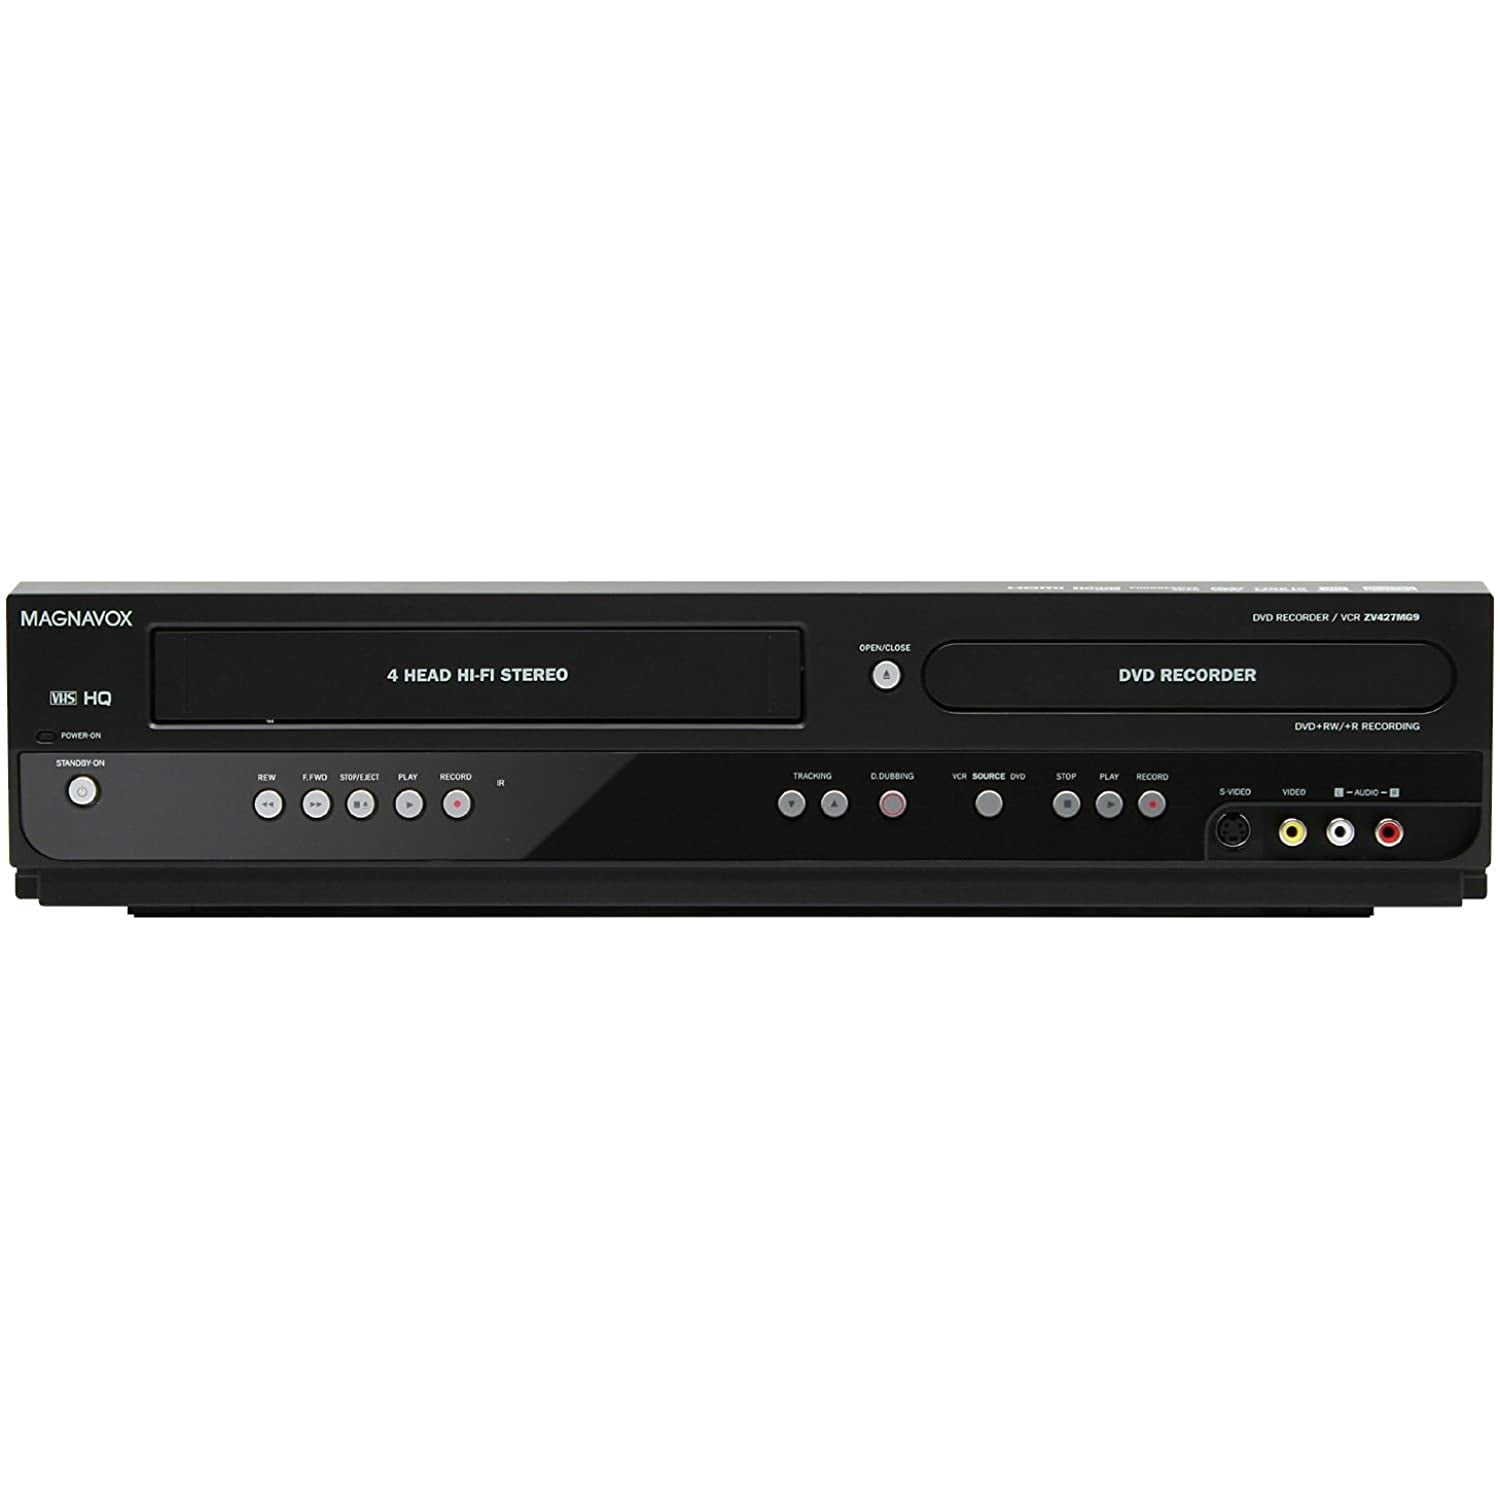 Magnavox ZV427MG9 DVD Recorder / VCR with Line-In Recording No 